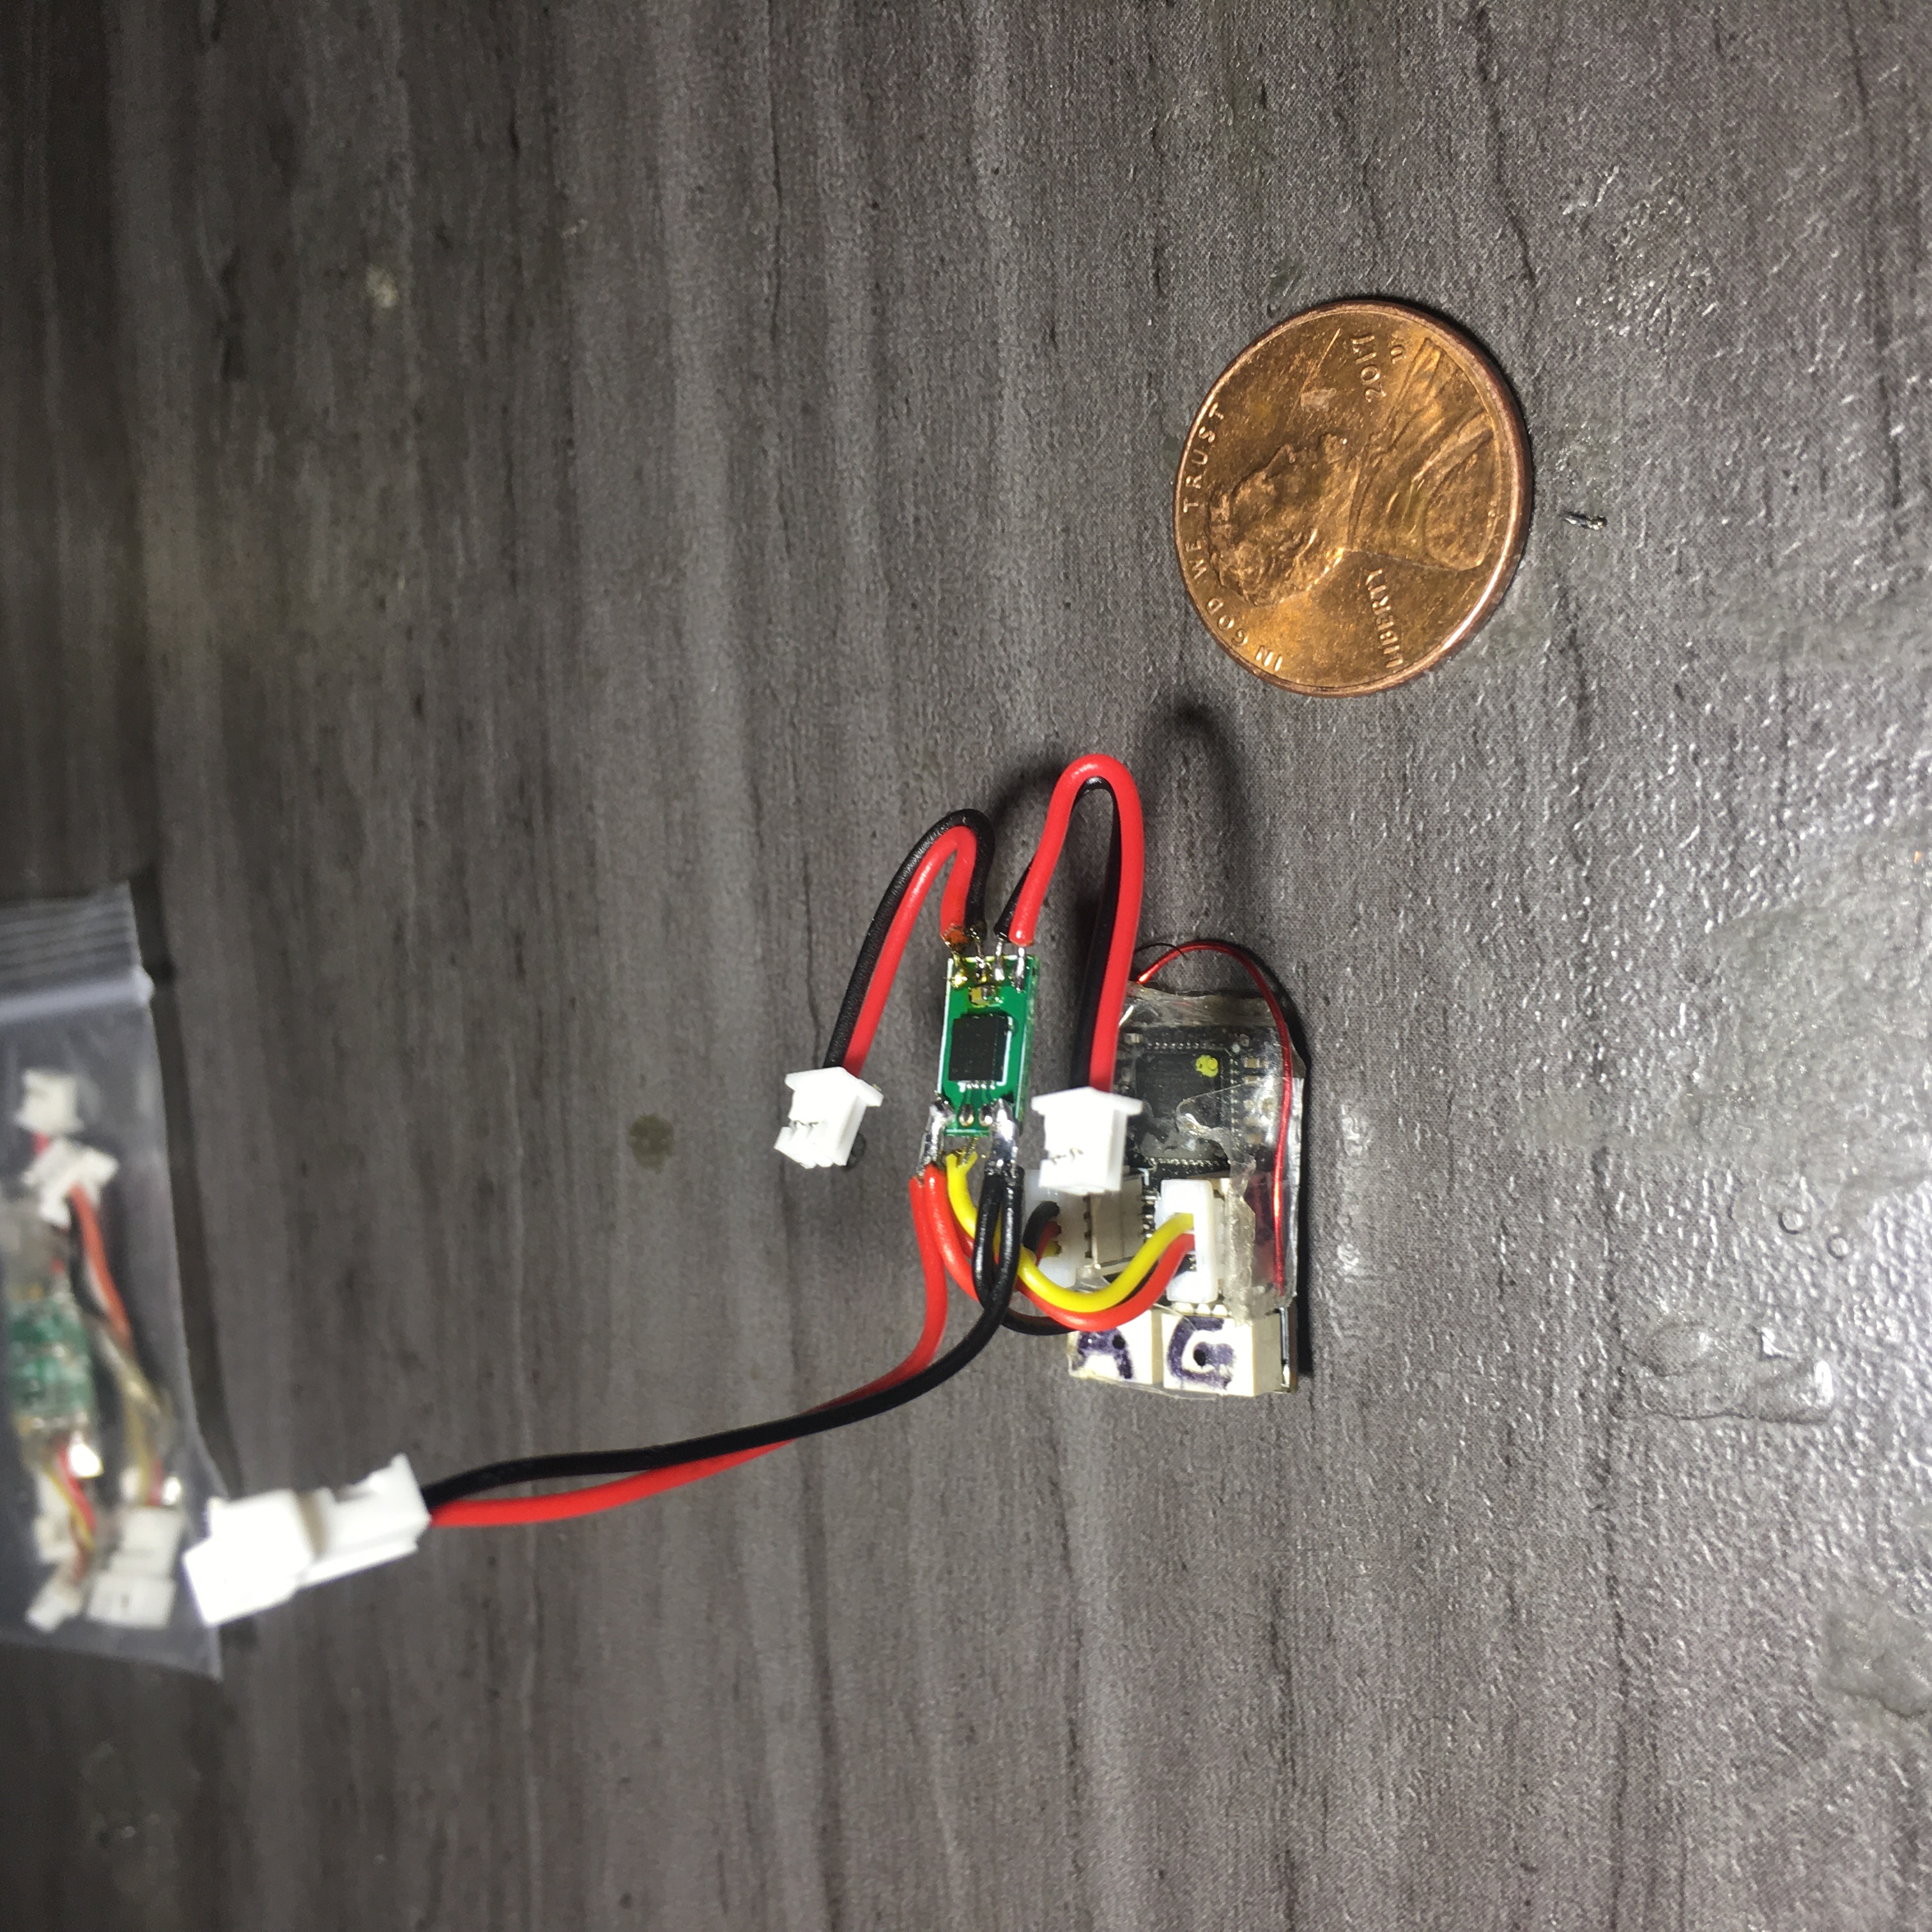 Here is one of those tiny dual ESC's plugged into a RX42 Telemetry receiver. This one just wired and has not had final wire forming yet. I will soon wire another this time WITHOUT mixer and show pictures of it stand alone.